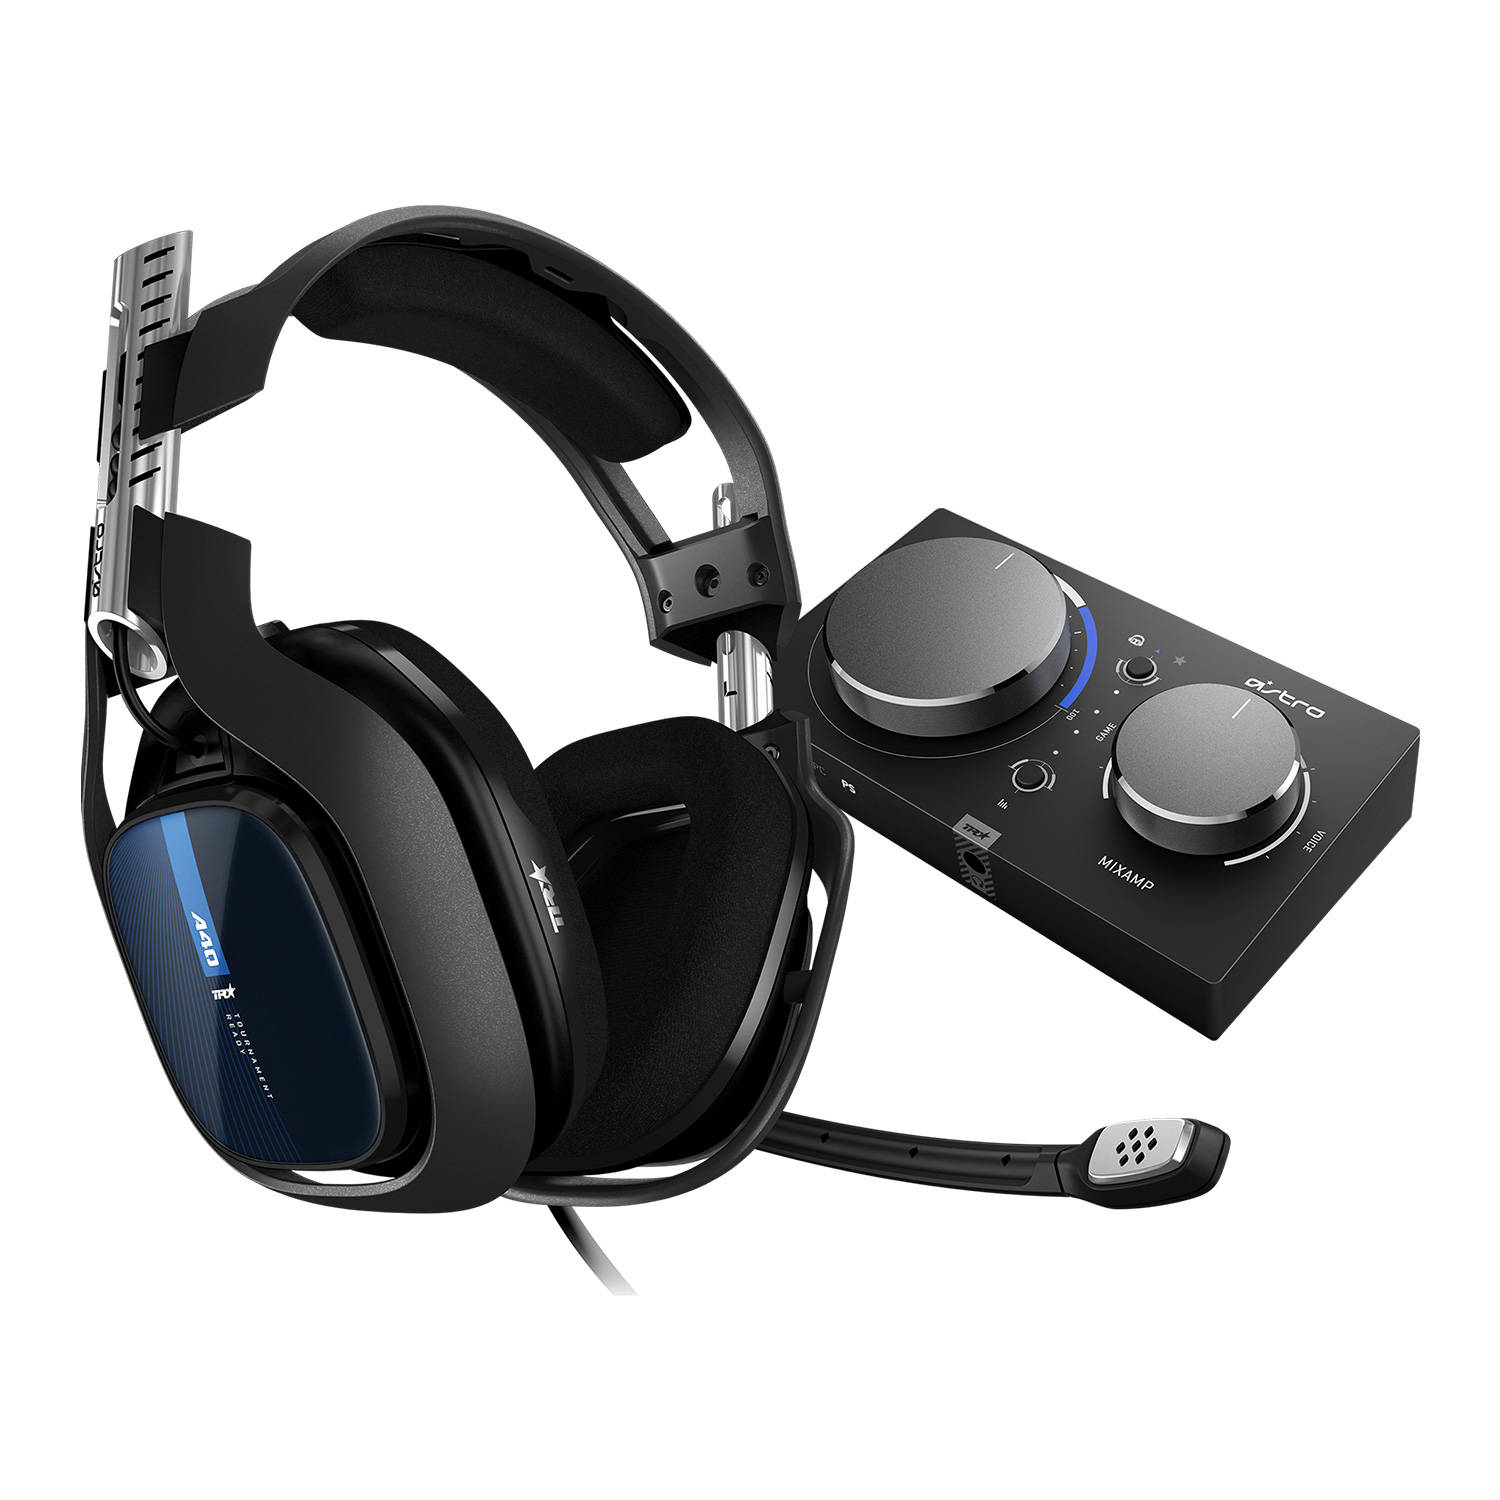 A40 Tr Headset + Mixamp Pro Tr